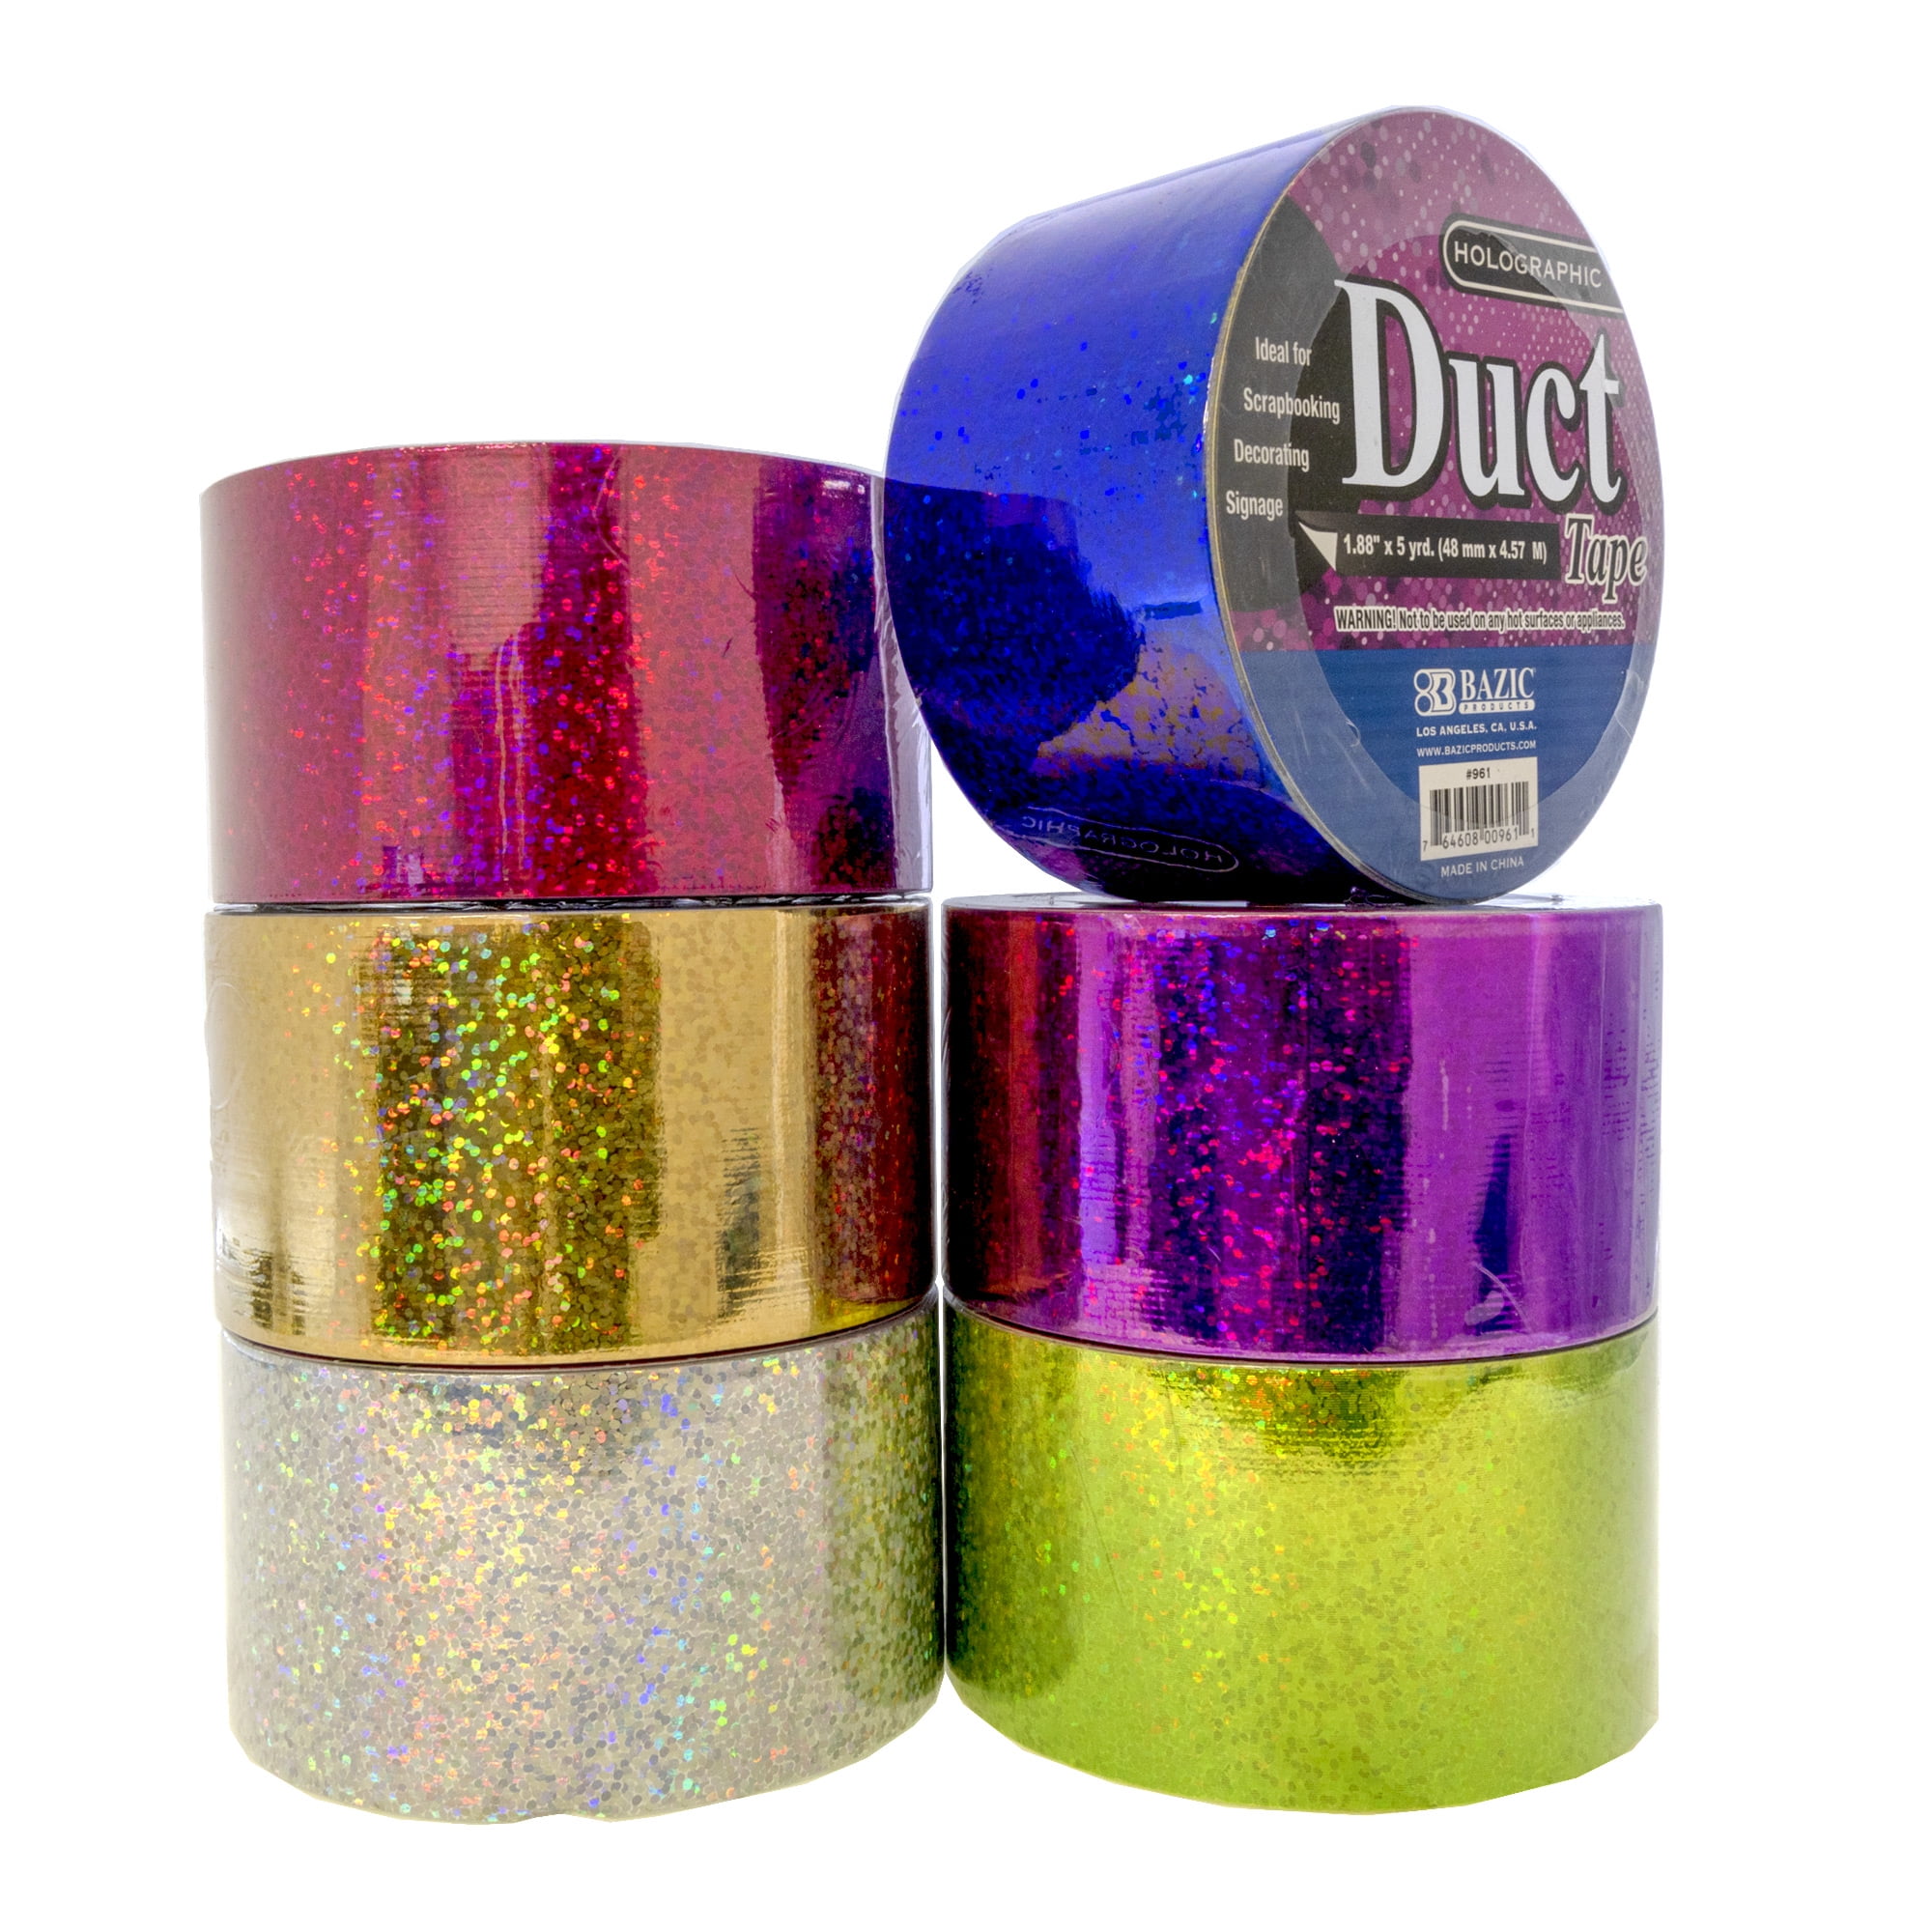 1.88 x 10 yrd. Assorted Fluorescent Colored Duct Tape